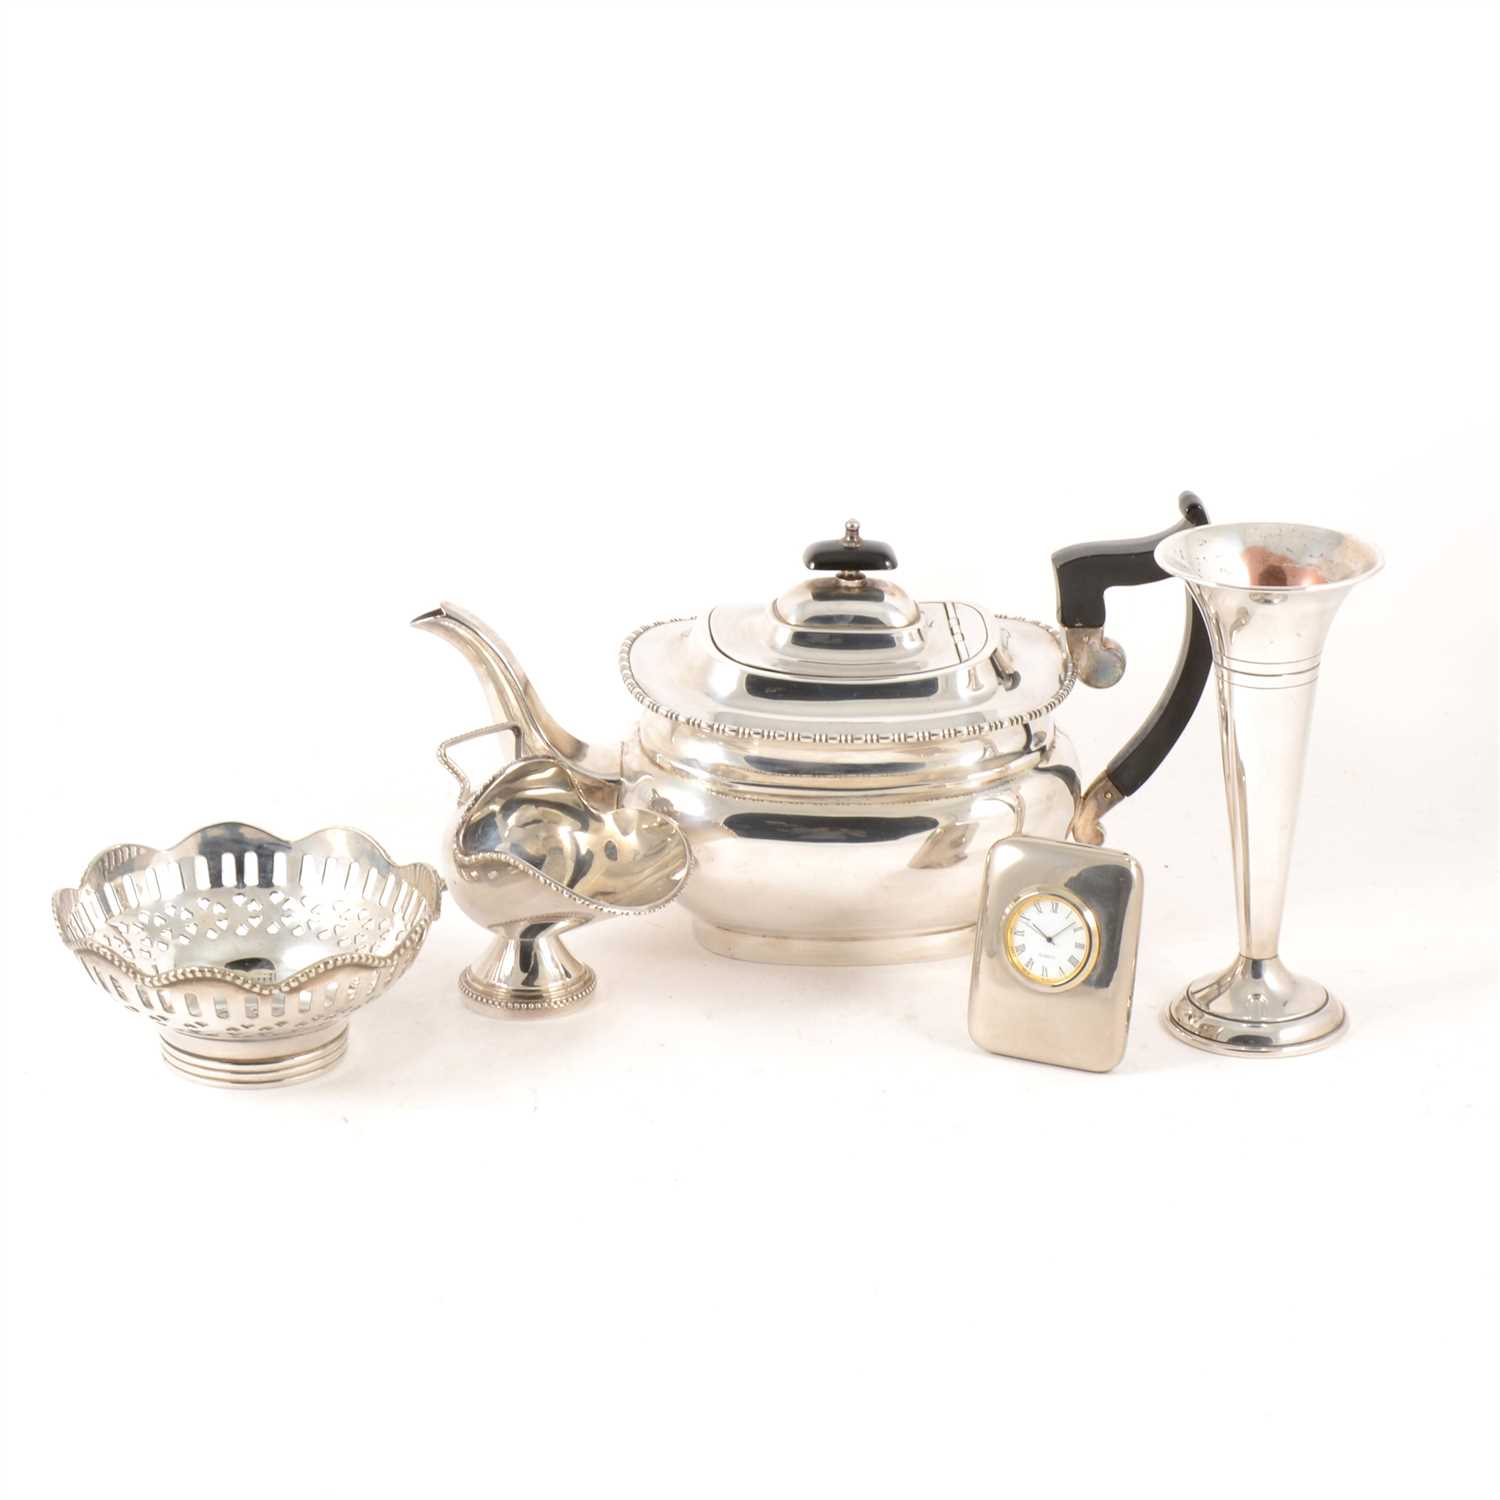 Lot 91 - A collection of silver-plated wares, trumpet vase, bon bon dishes, cream jug